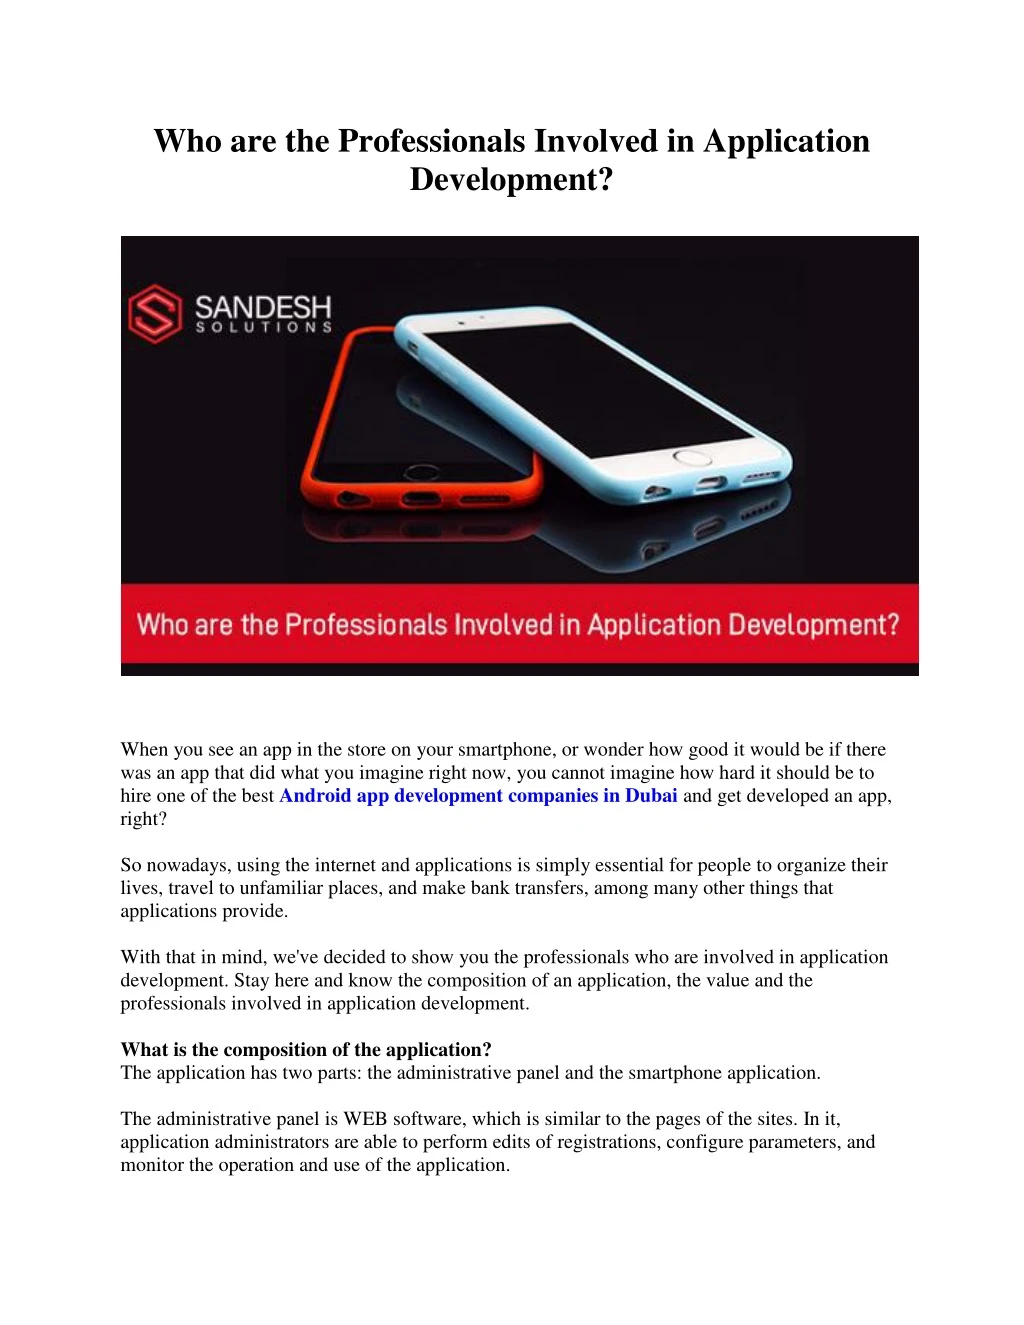 who are the professionals involved in application